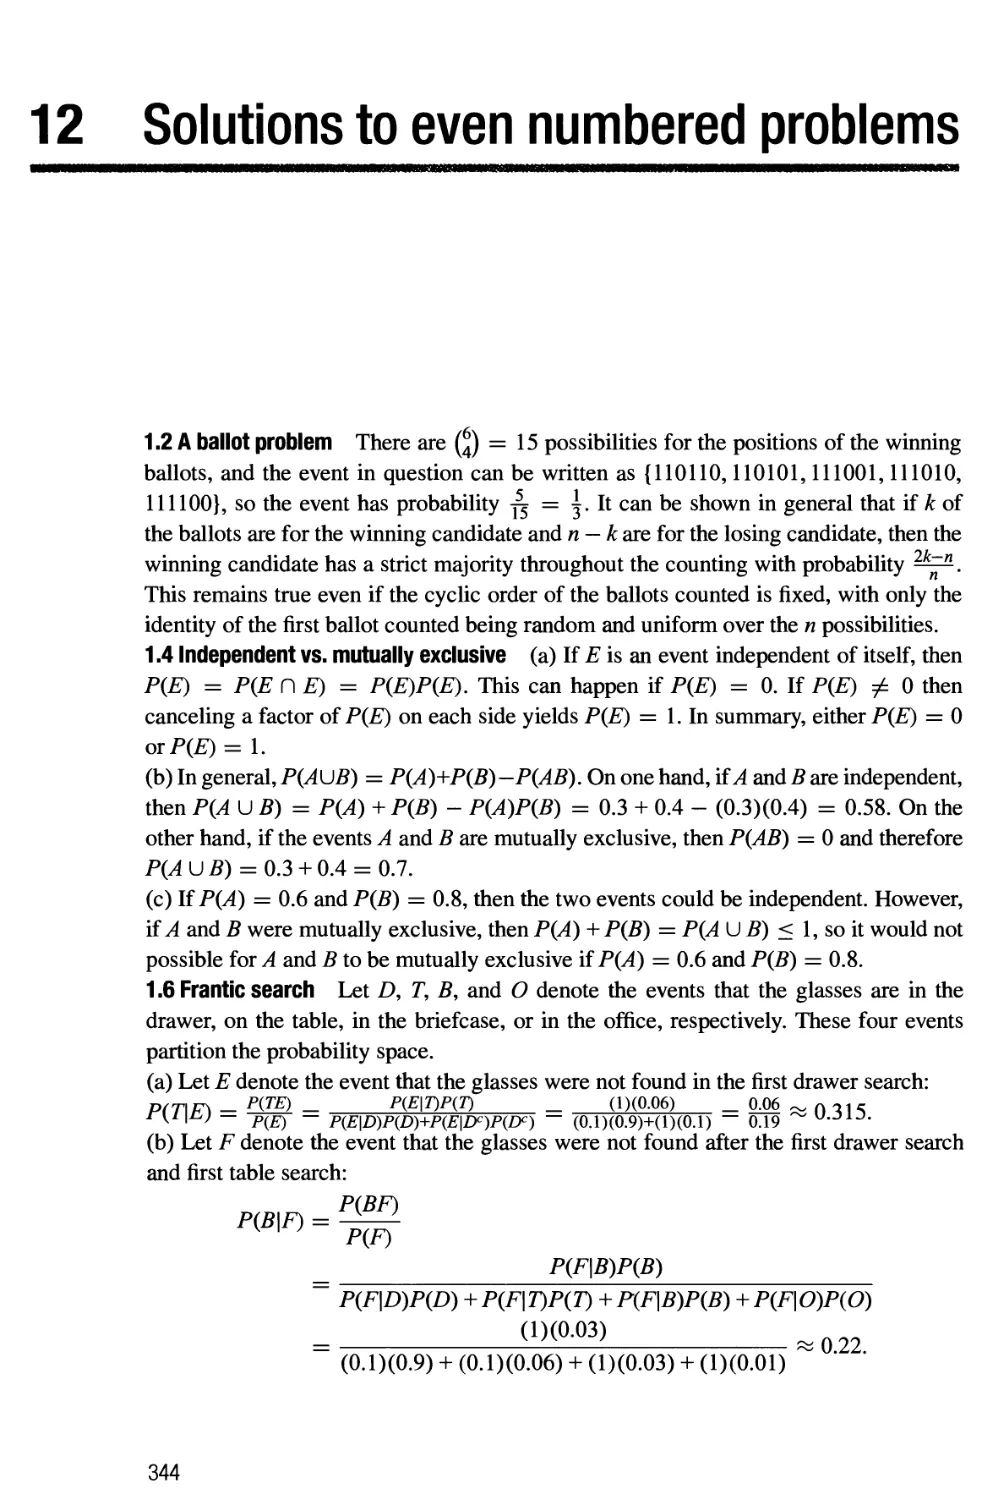 12 Solutions to even numbered problems 344